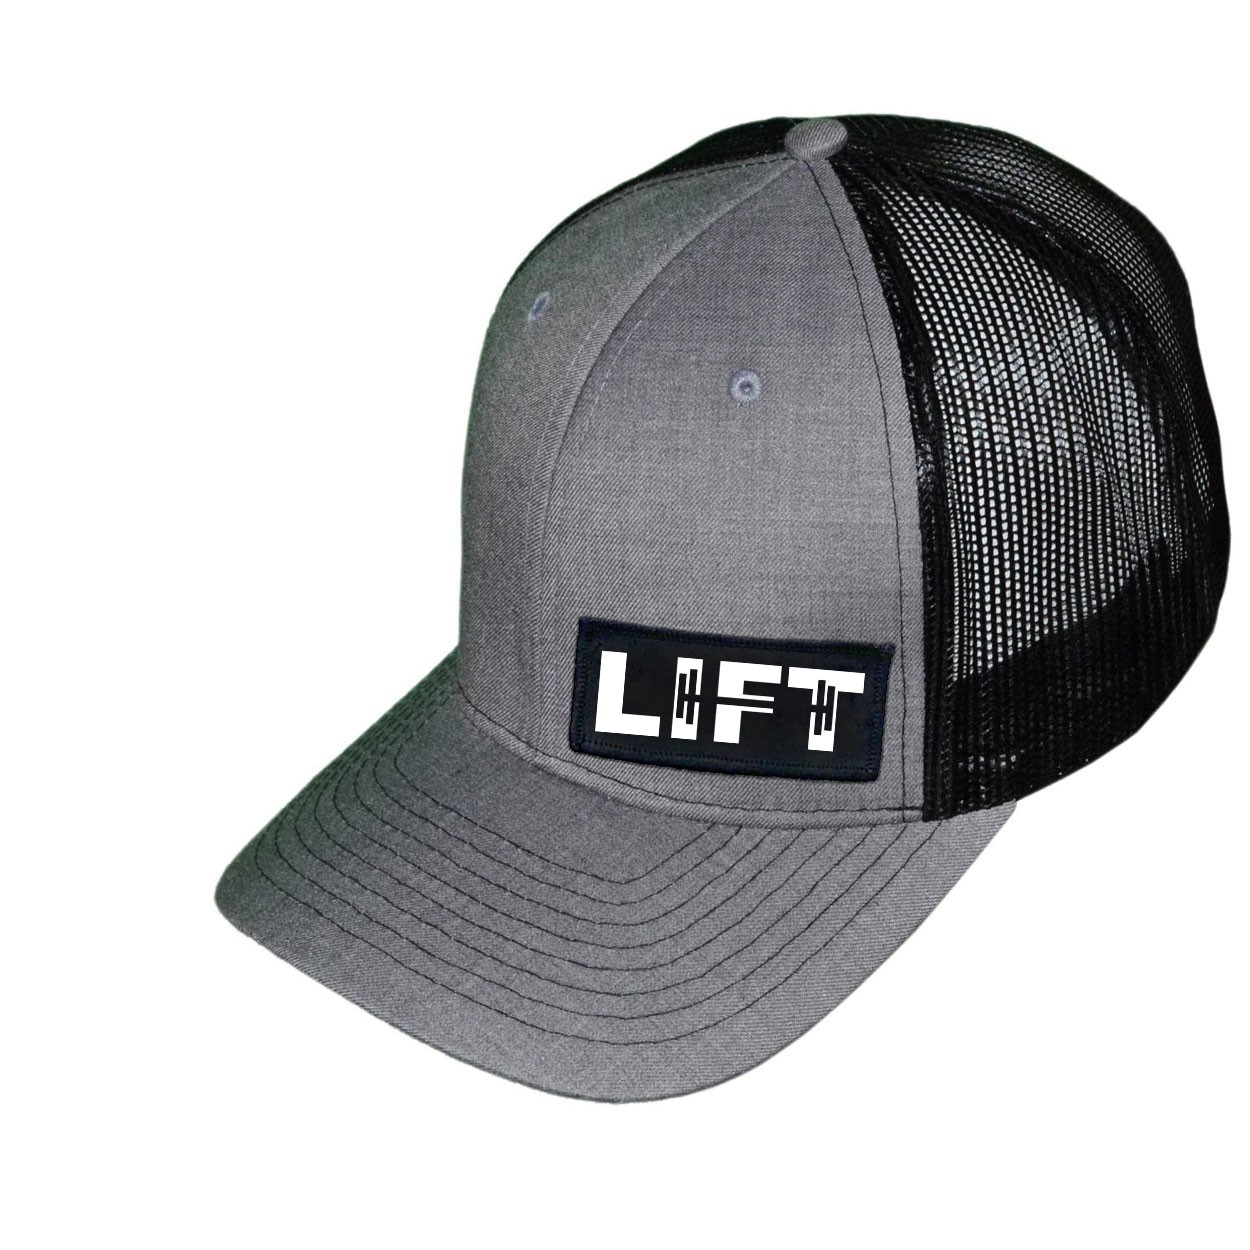 Lift Barbell Logo Night Out Woven Patch Snapback Trucker Hat Heather Gray/Black